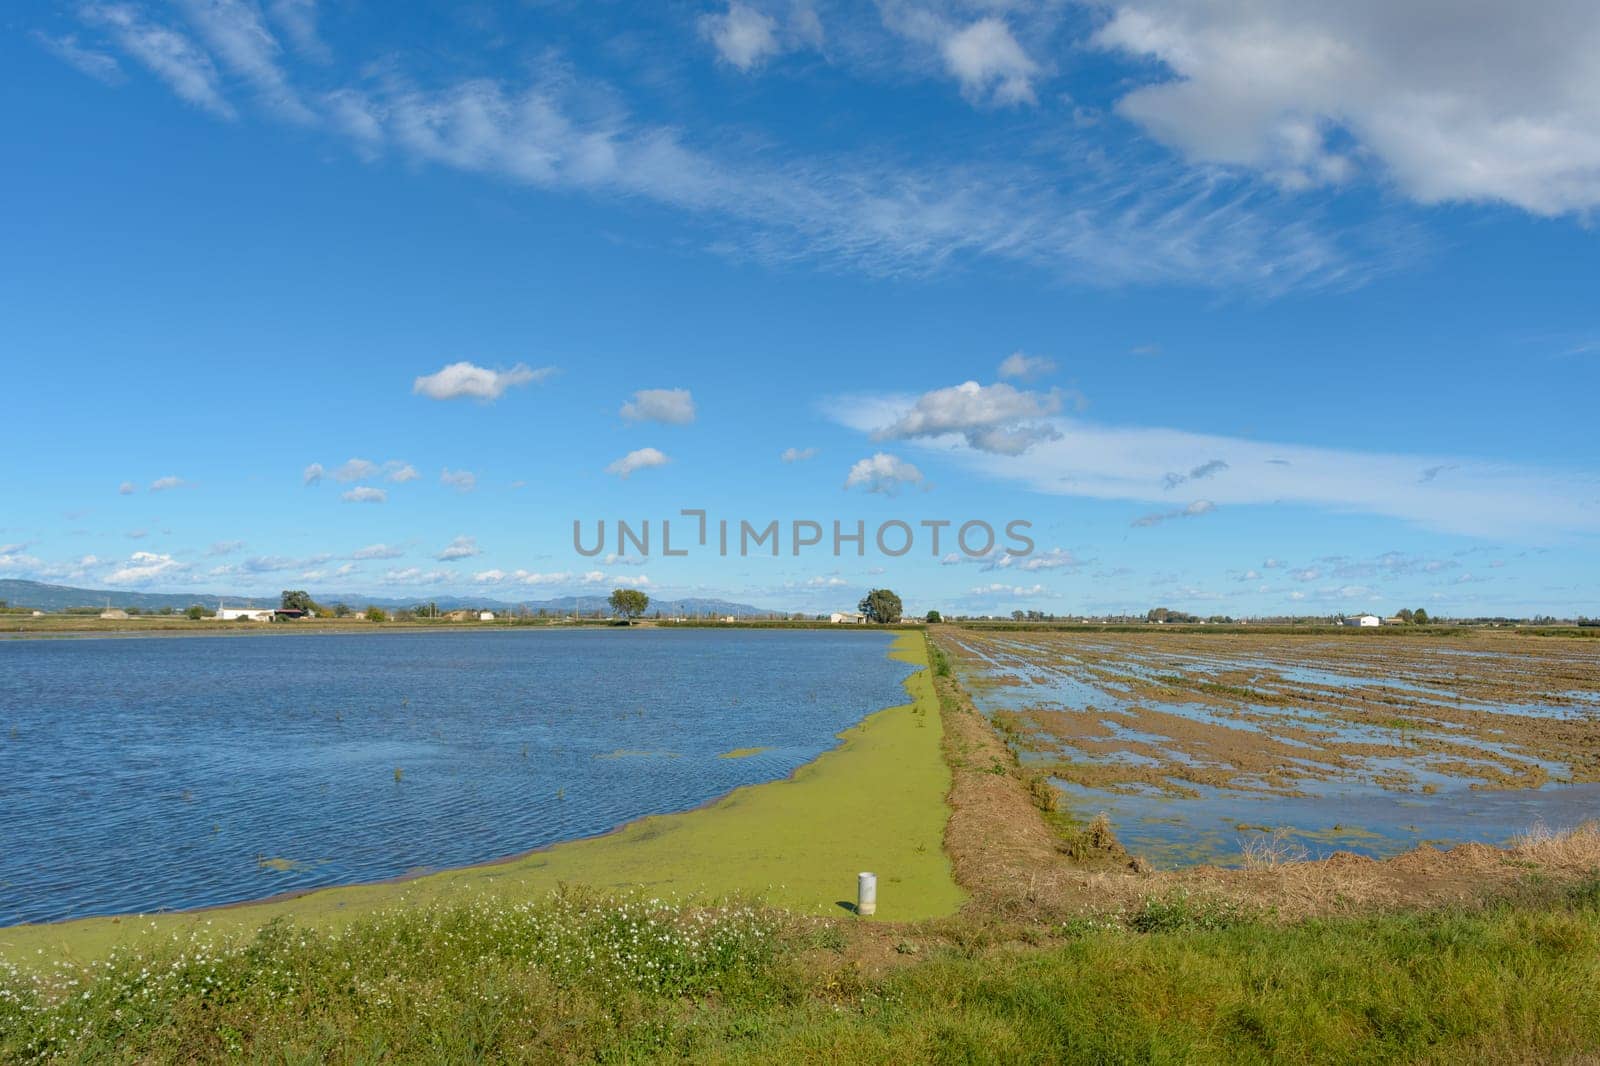 Calm rural landscape with a flooded field under a blue sky with fluffy clouds, ebro delta, tarragona, catalonia, spain by carlosviv